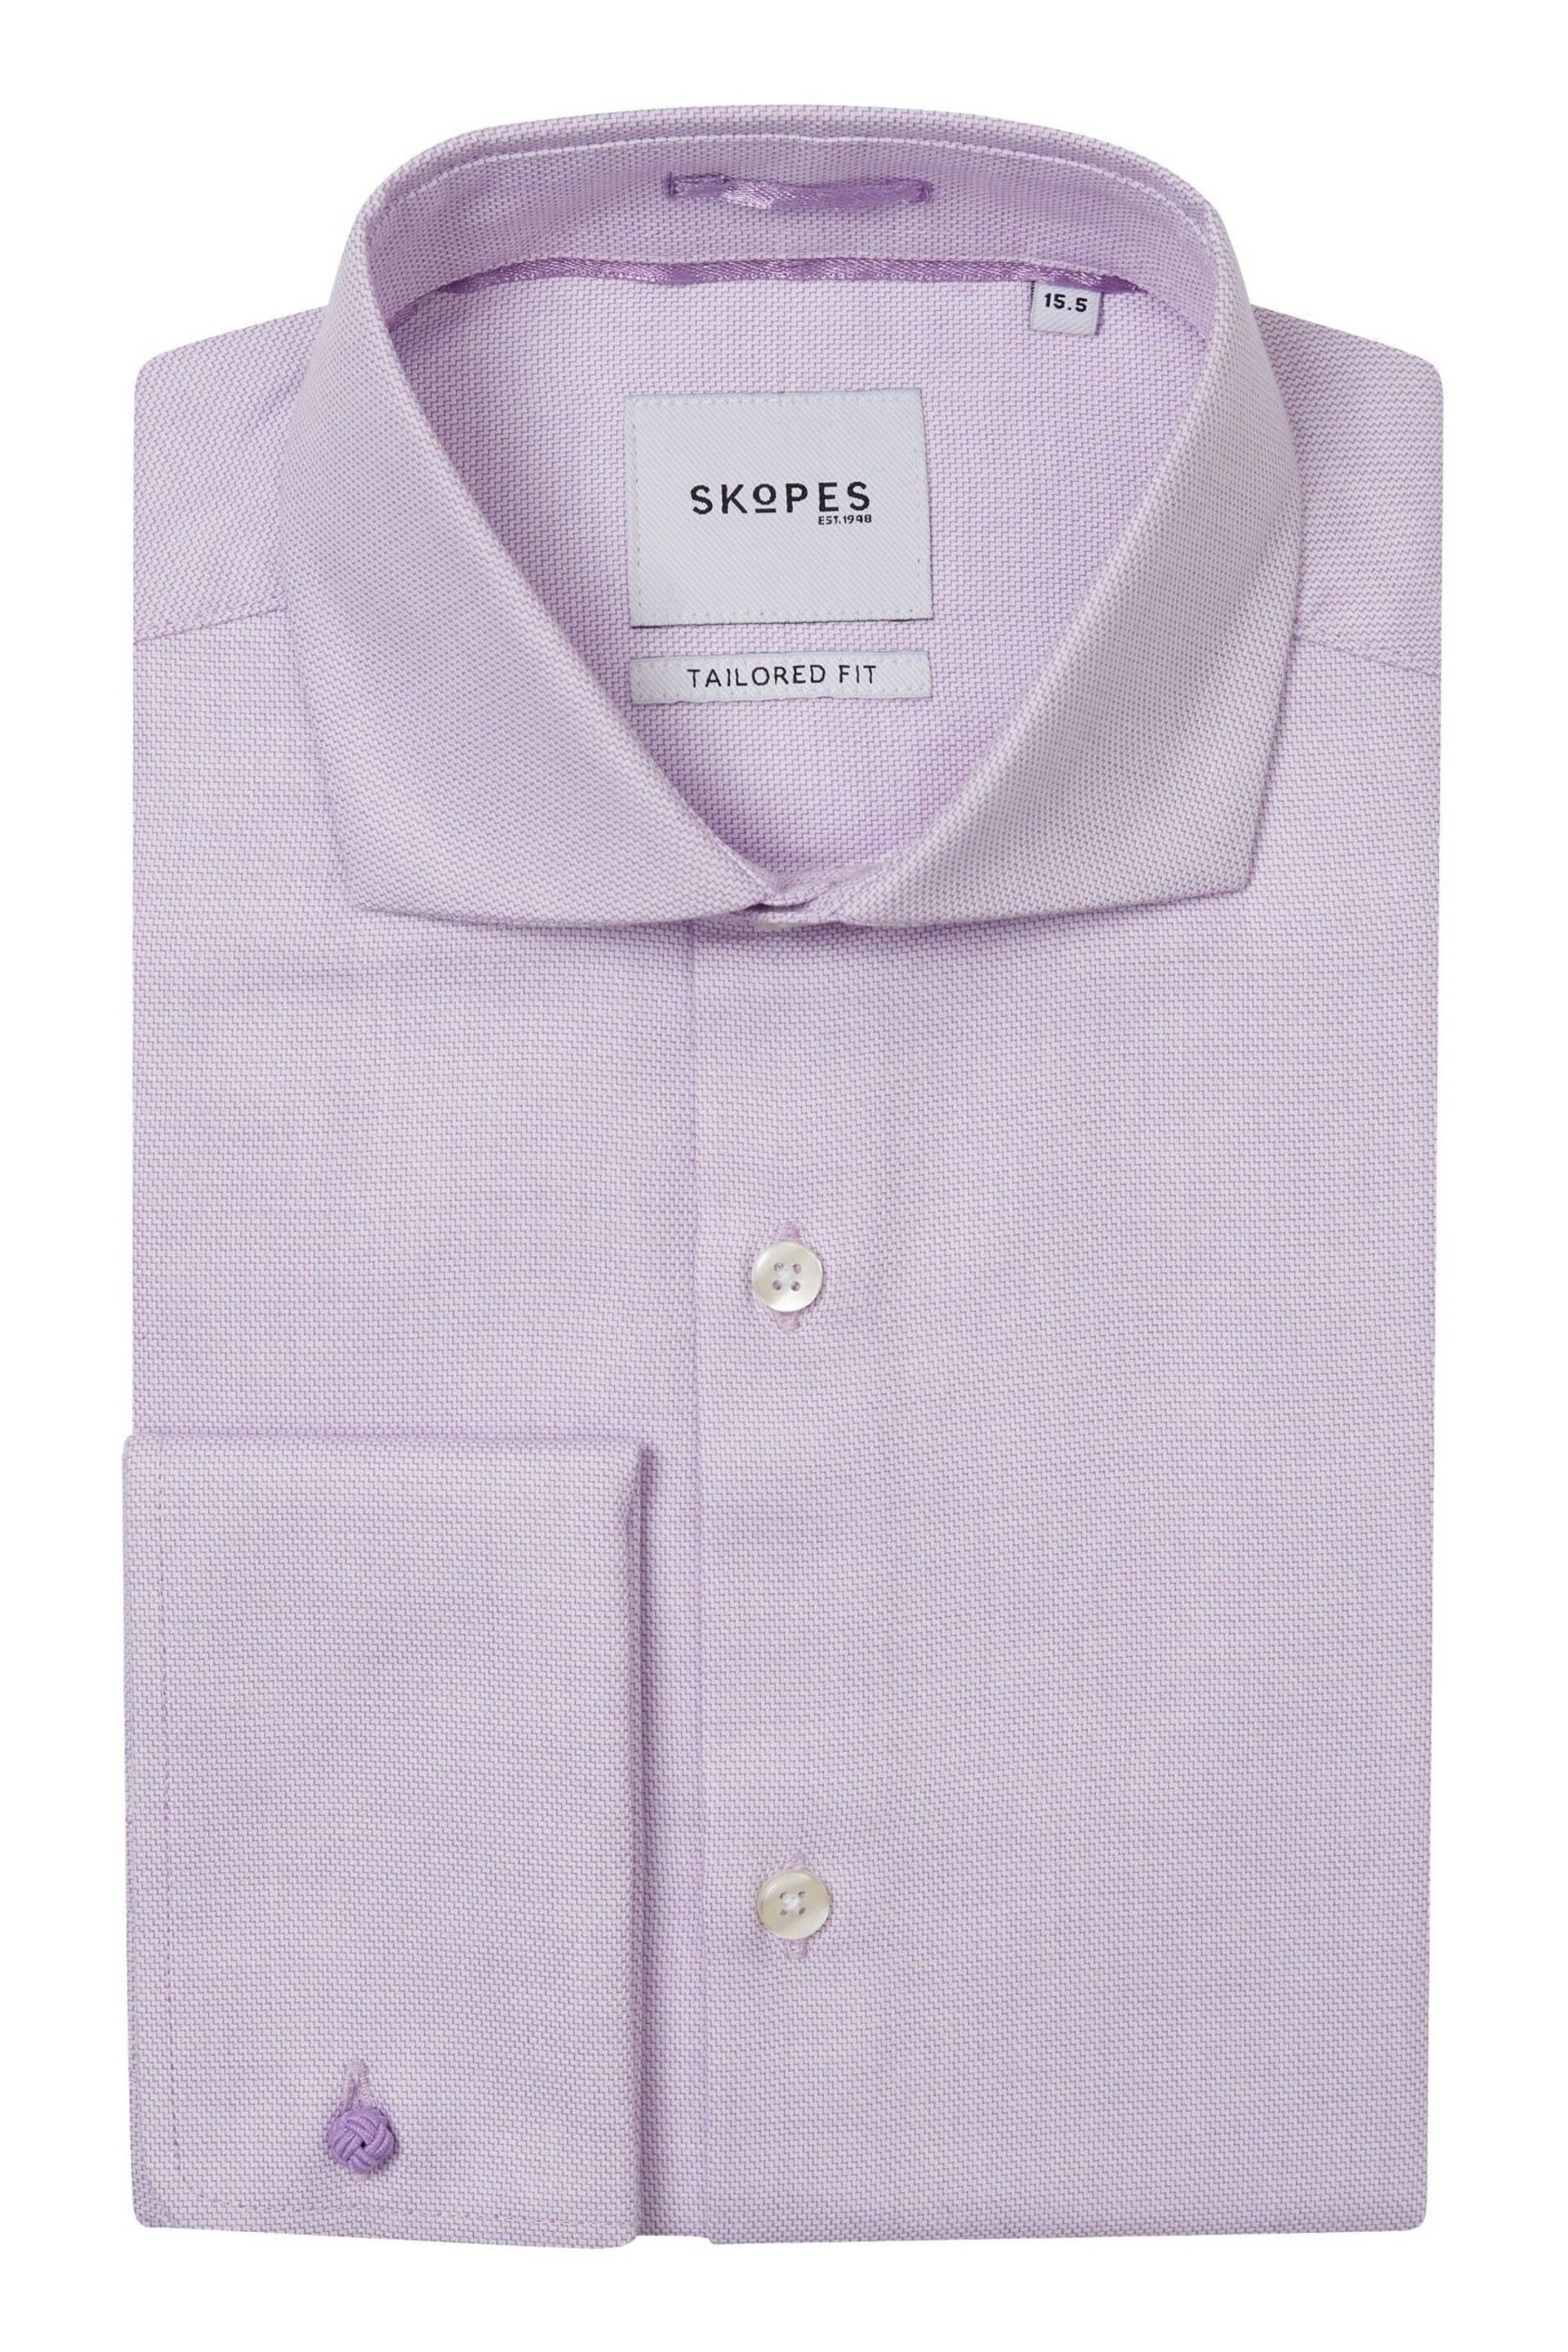 Skopes Tailored Fit Double Cuff Dobby Shirt - Image 4 of 6